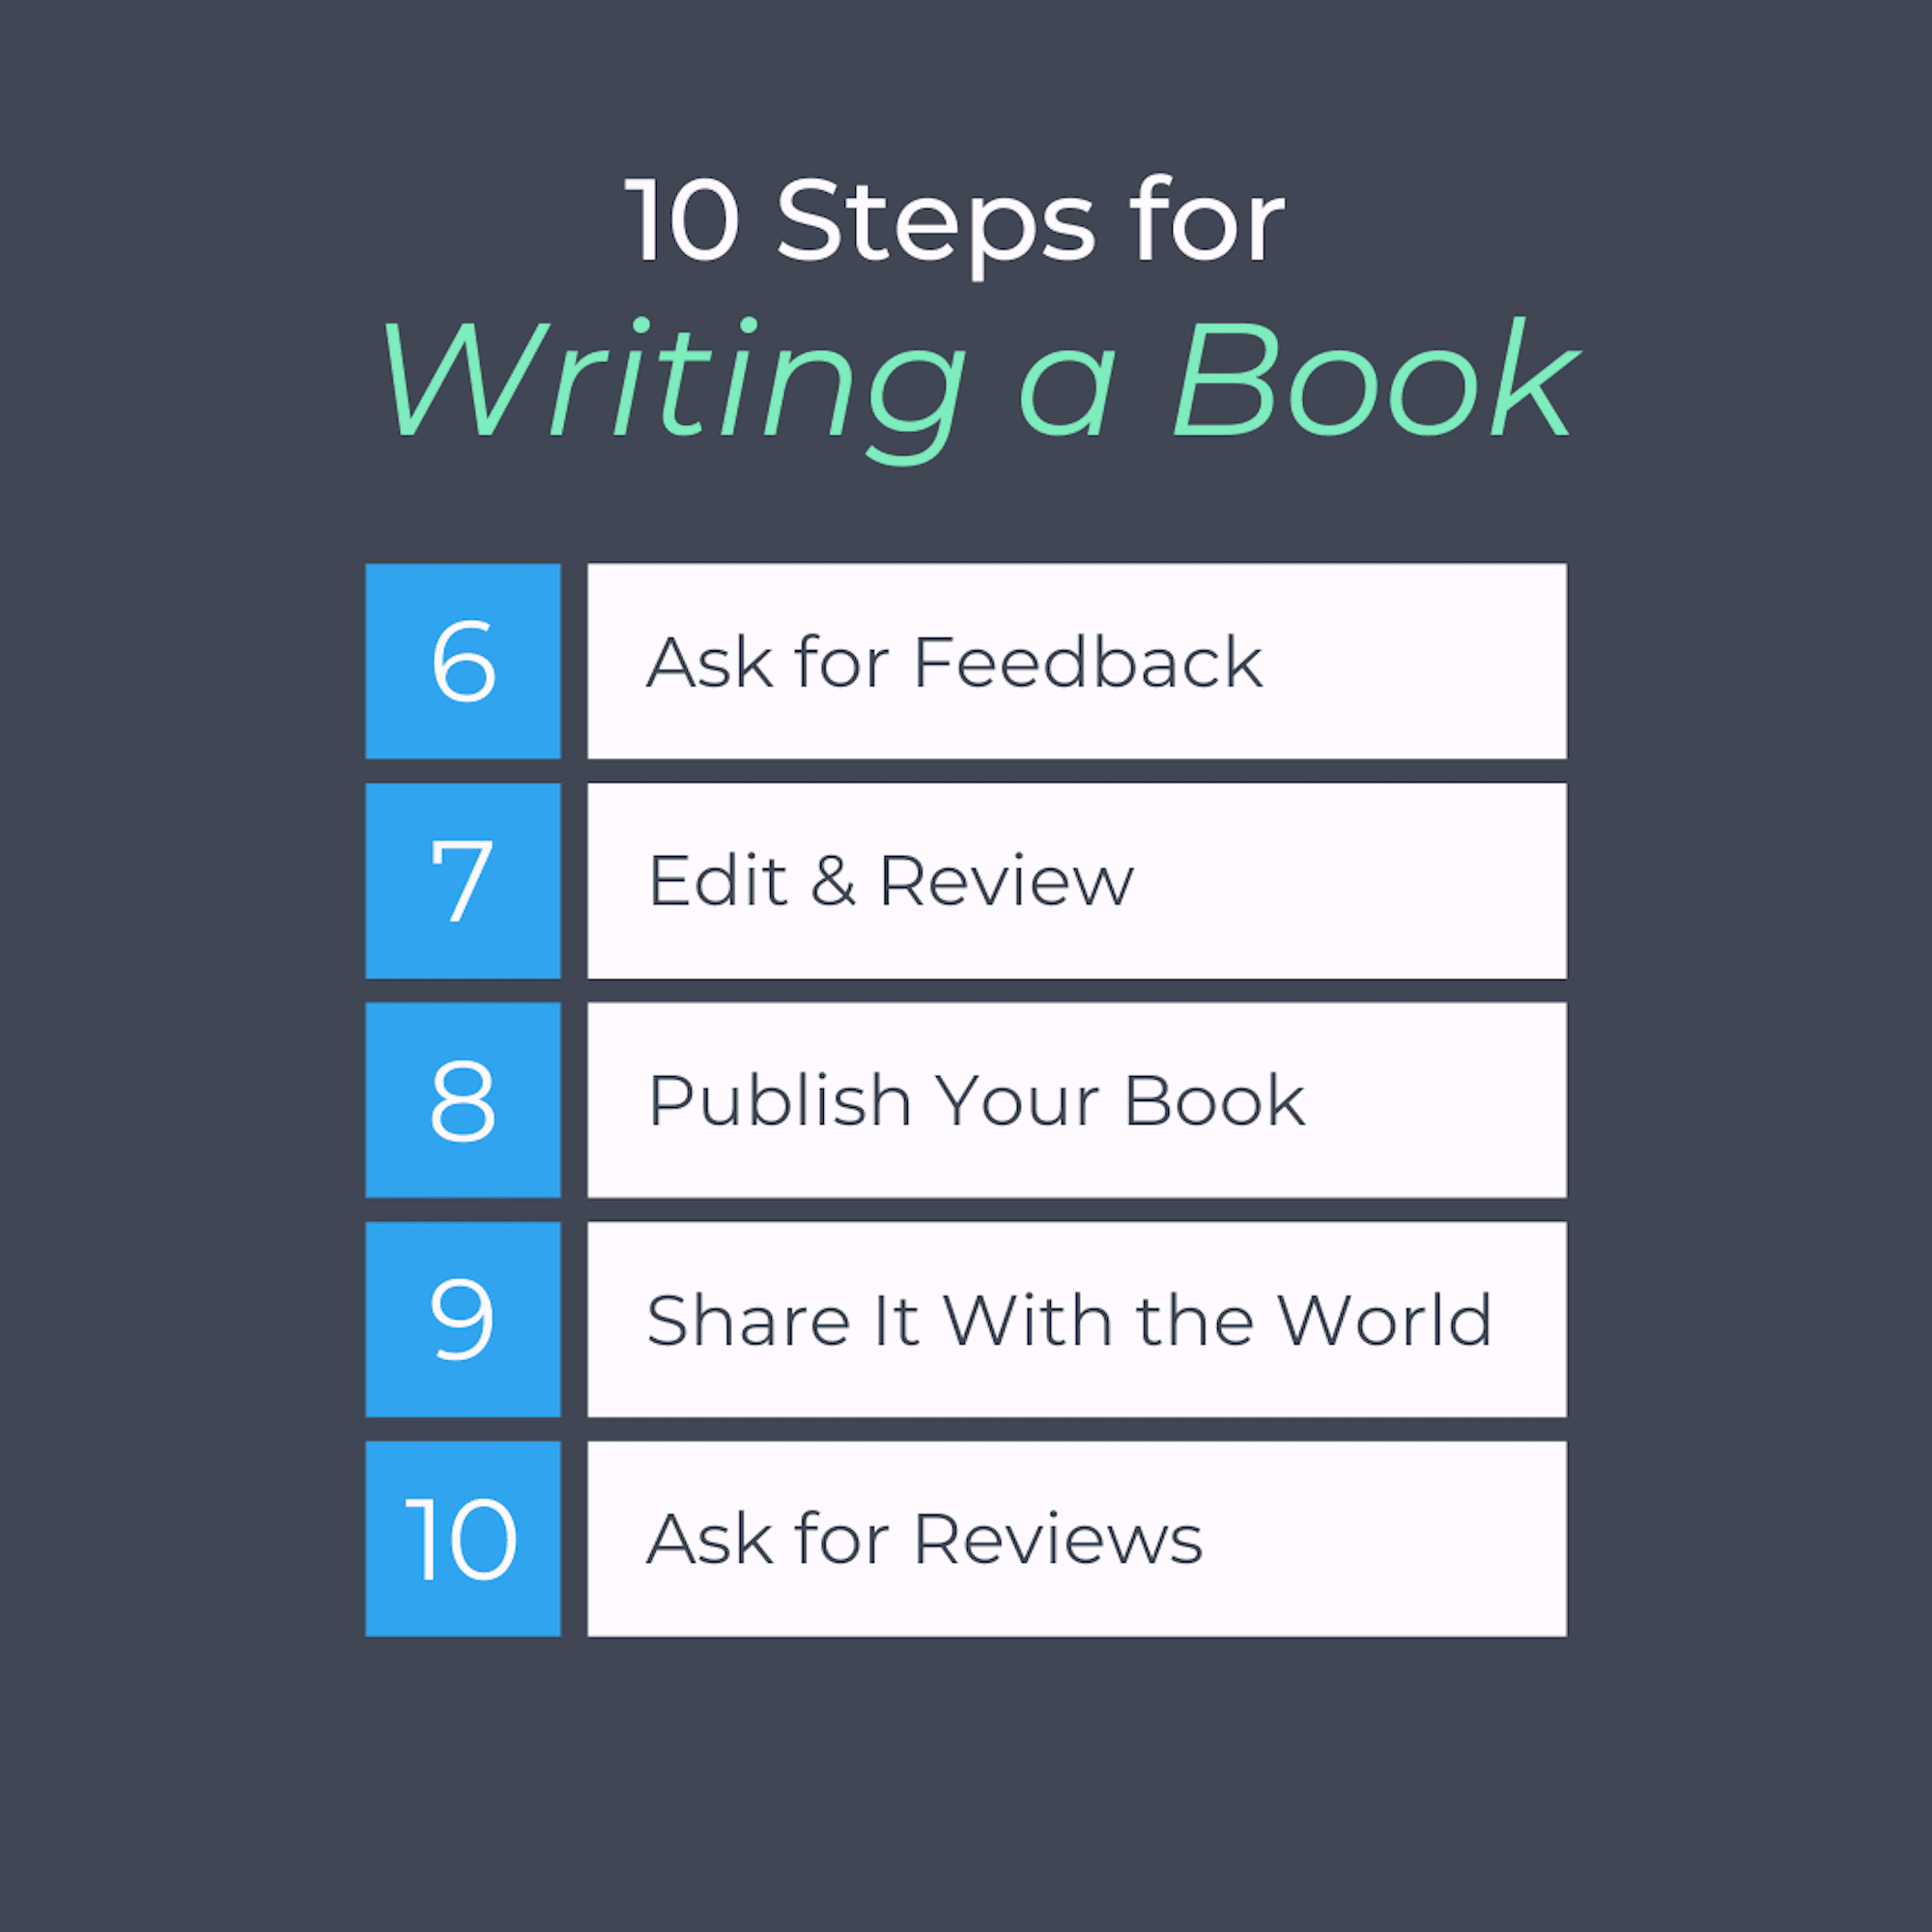 10 Tips for Writing a Book